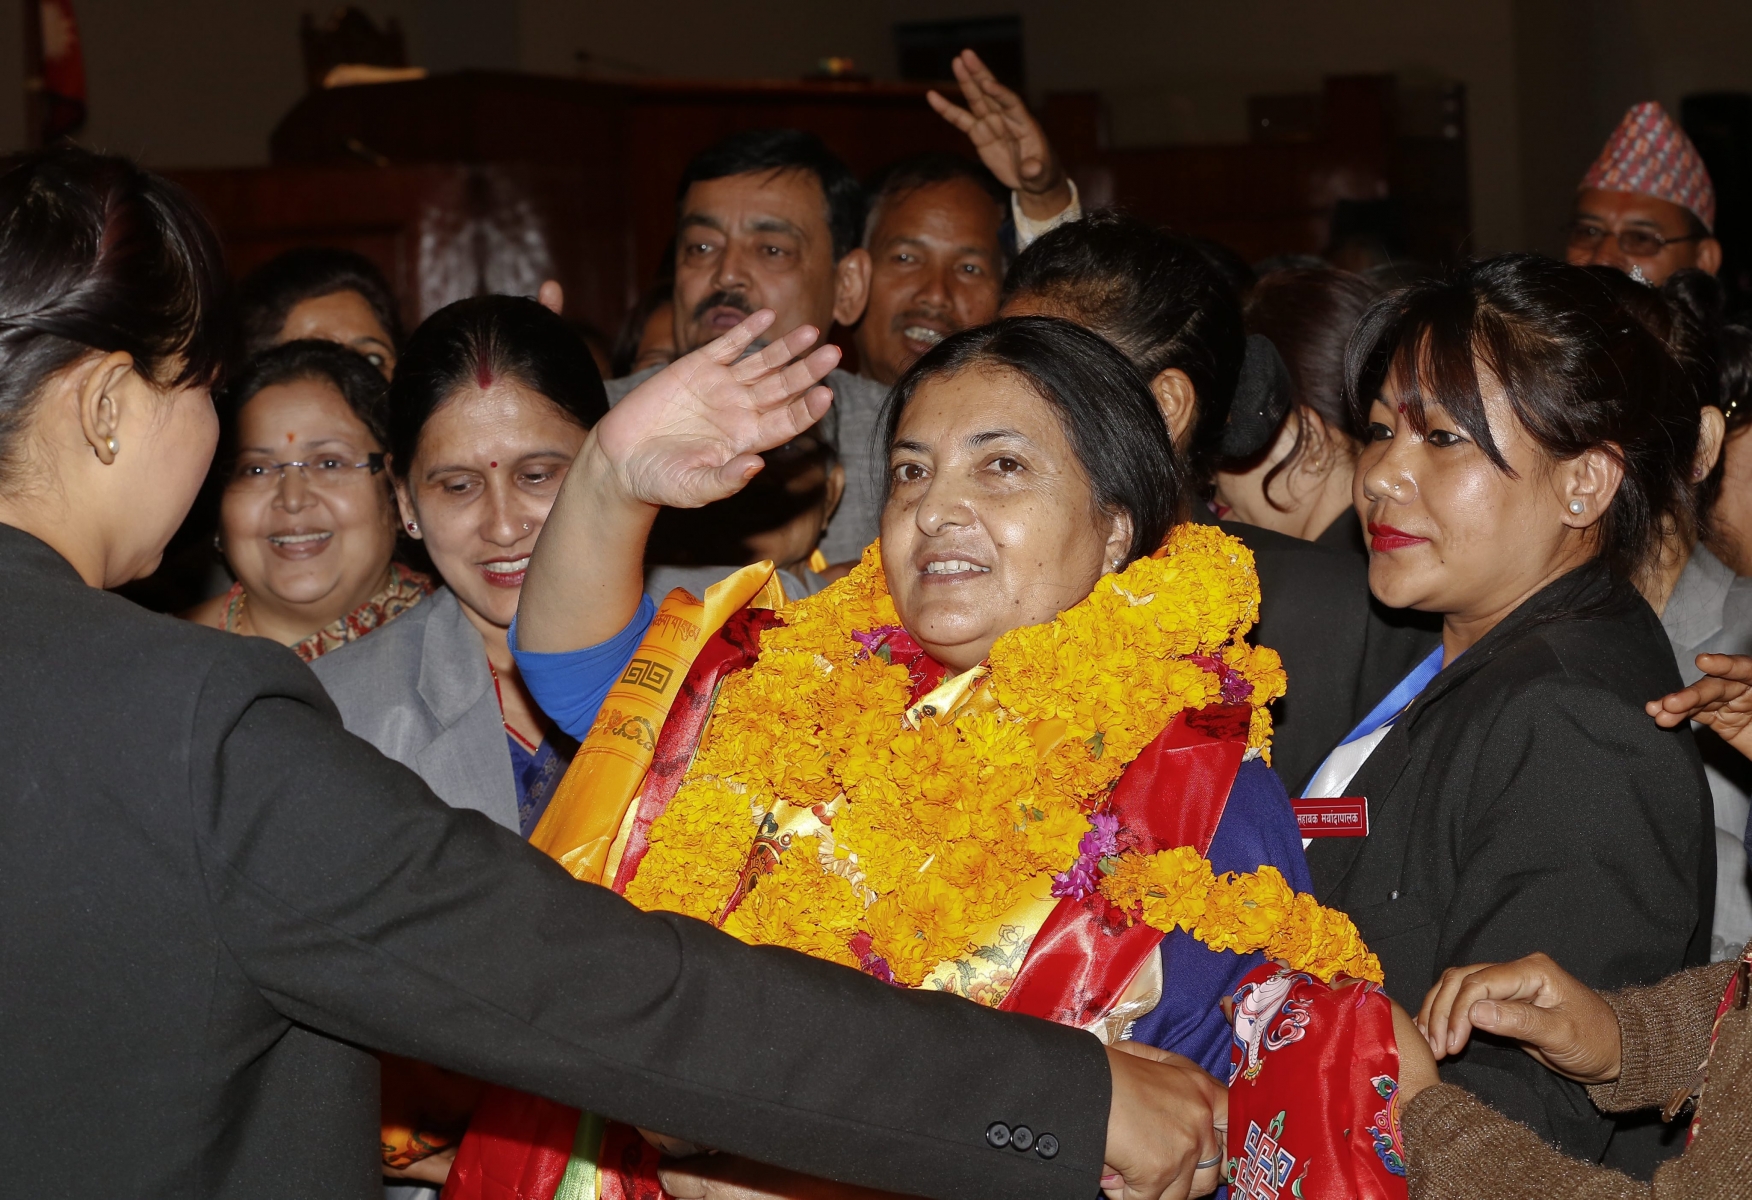 epa04999859 Nepal's first elected woman president Bidhya Bhandari waves after she is elected as New President of Nepal at the parliament in Kathmandu, Nepal, 28 October 2015. Bhandari who is the widow of the deceased chairman of the Communist Party of Nepal-Unified Marxist-Leninist (UML) Madan Bhandari, won 327 votes to beat her competitor Kulbahadur Gurung, who got 214 votes, to secure the largely ceremonial post.  EPA/NARENDRA SHRESTHA